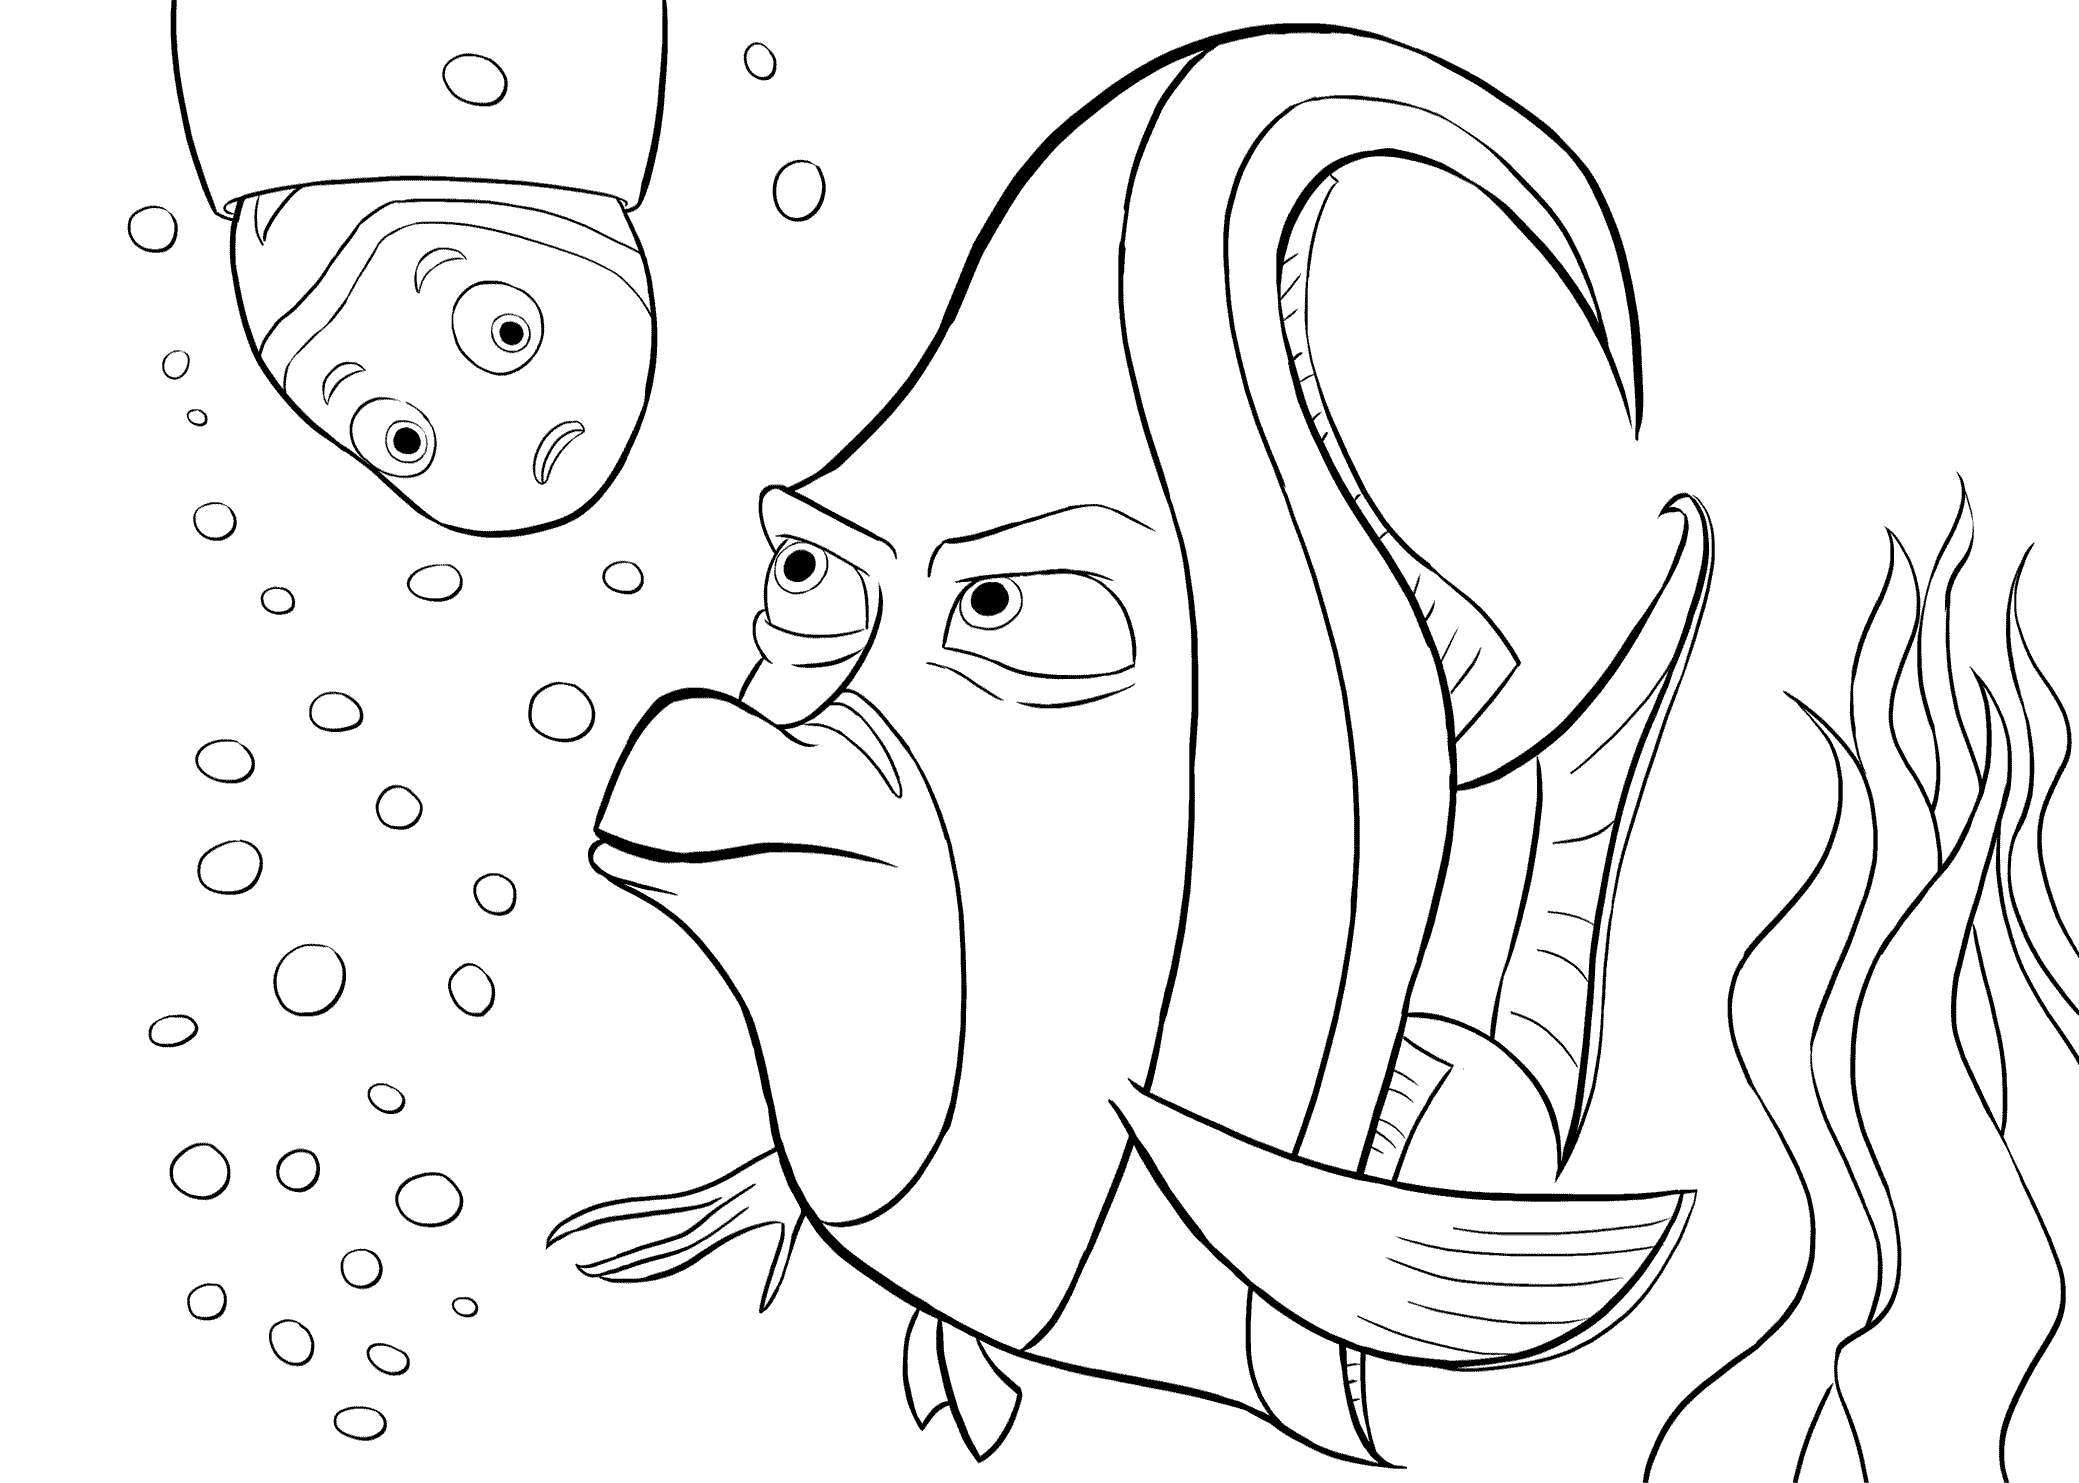 aquarium finding nemo coloring pages for kids printable free small